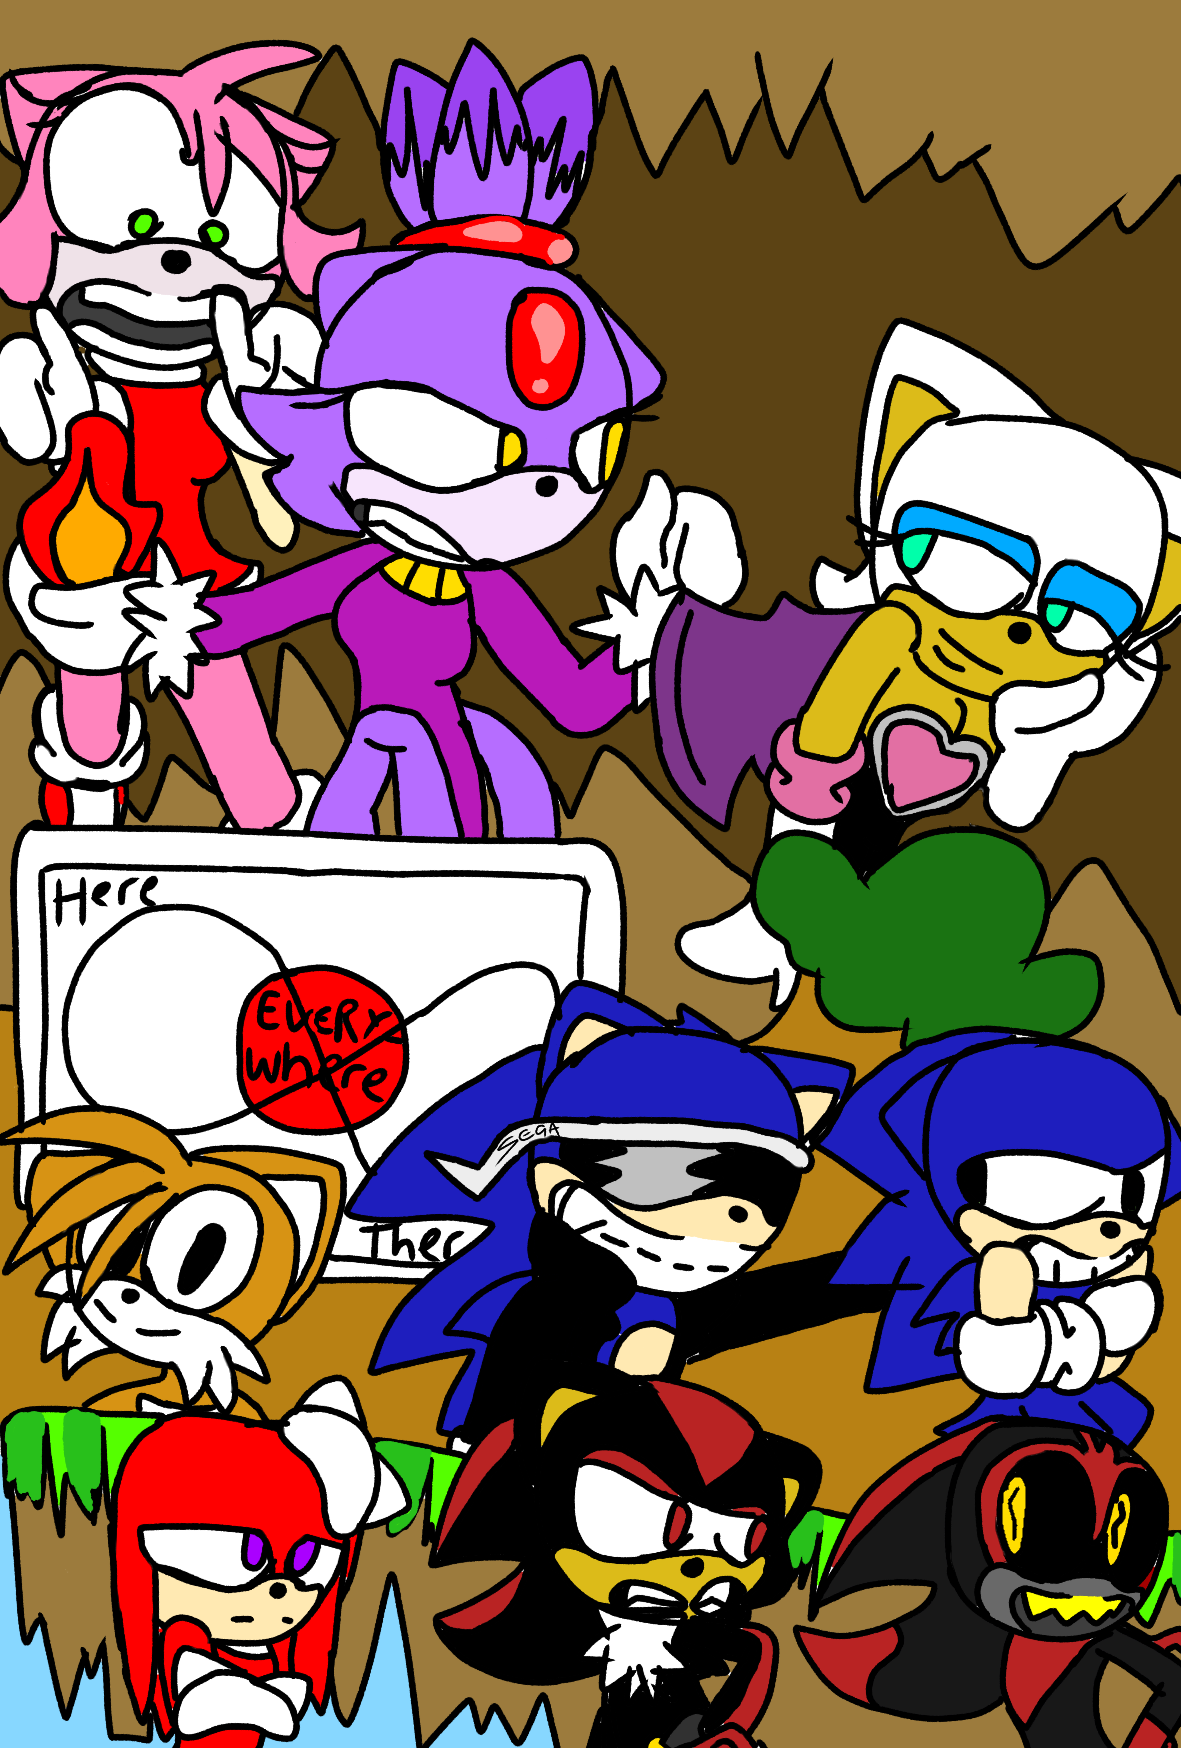 Archie Sonic family  art by: Lala : r/SonicTheHedgehog